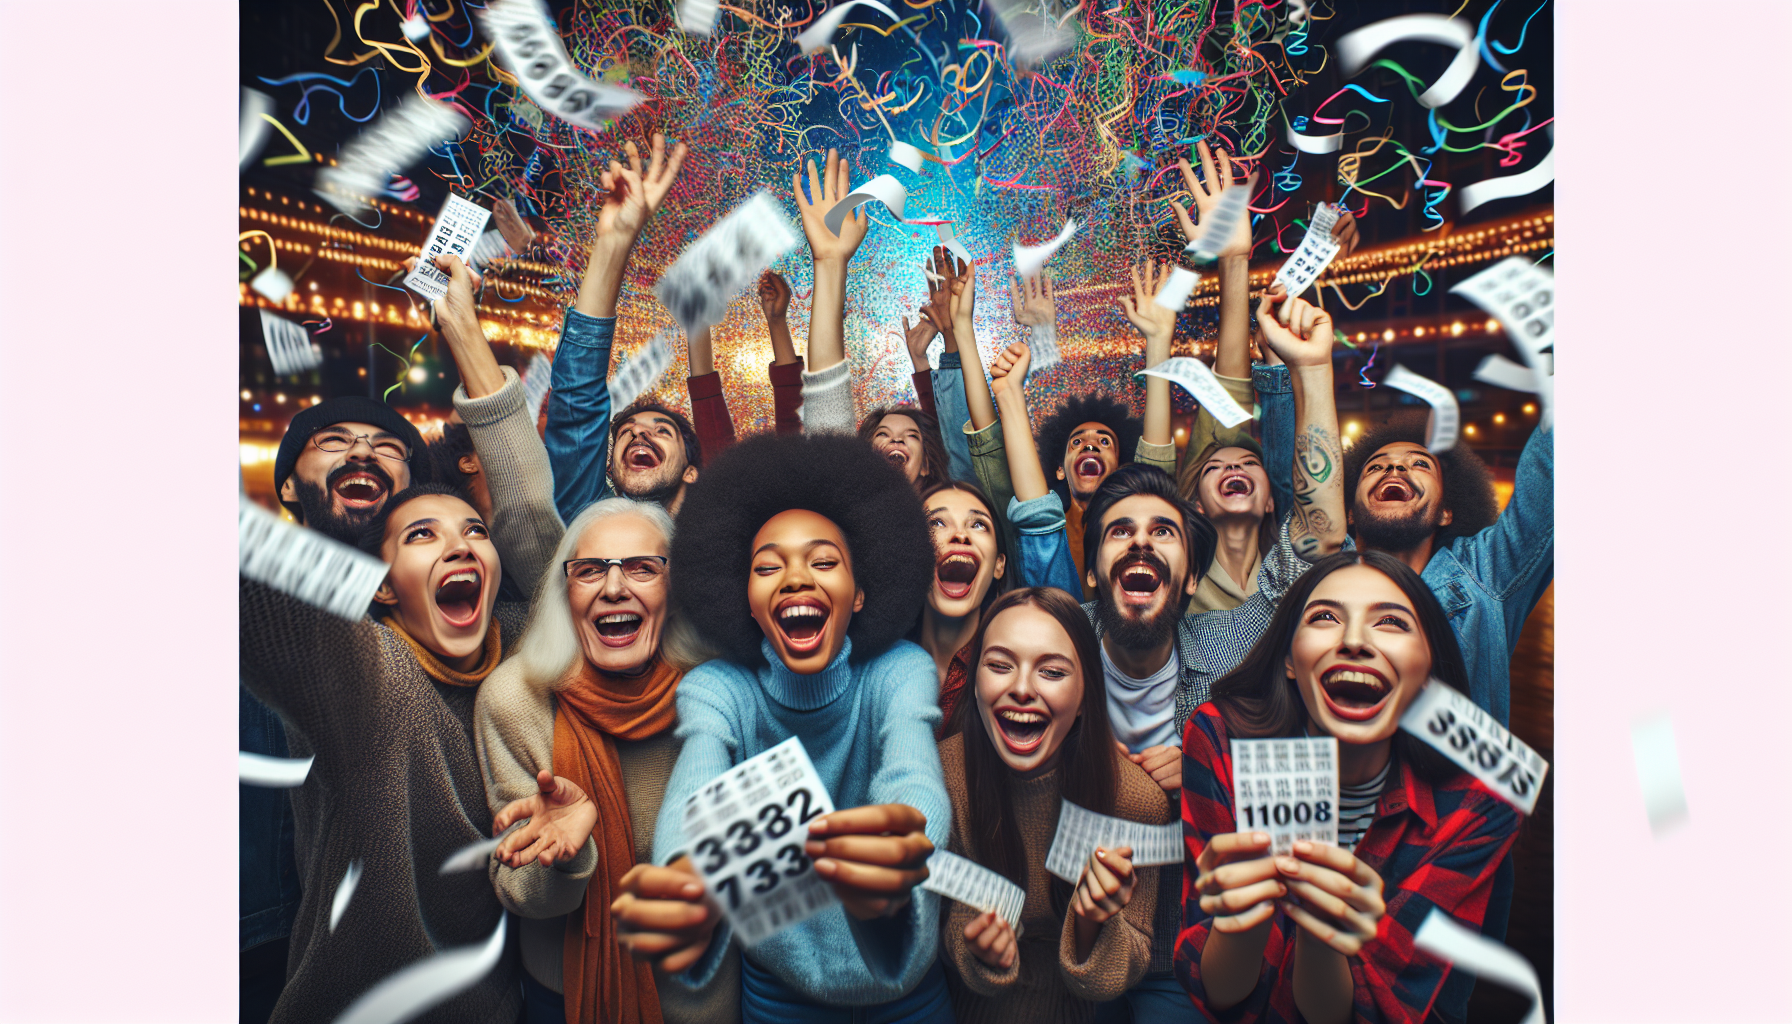 Illustration of people celebrating and holding Sambad Lottery bumper lottery tickets